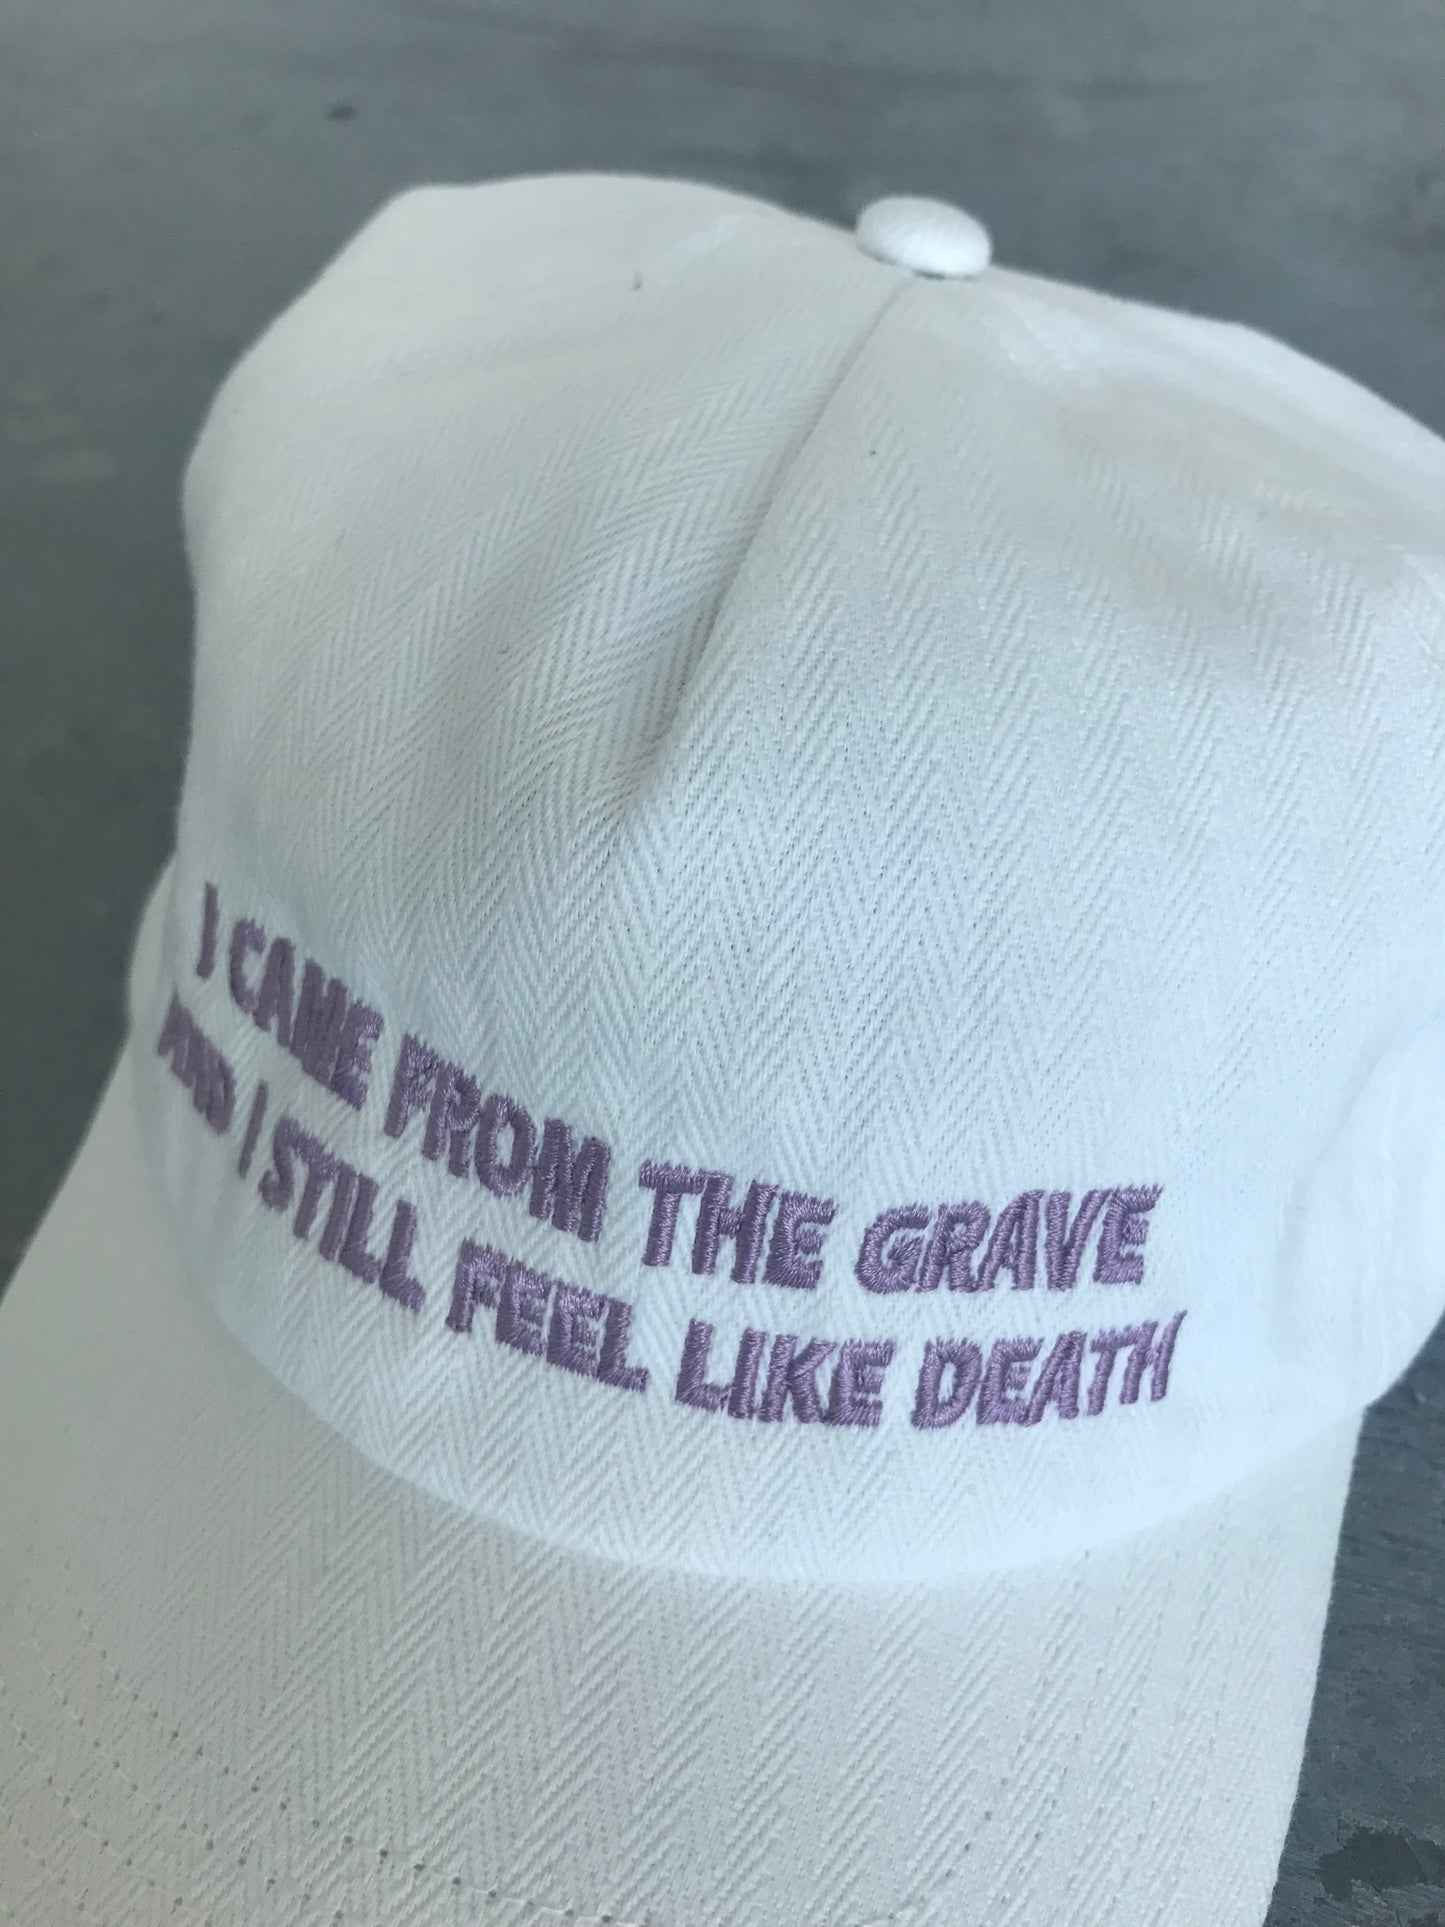 And I Still Feel Like Death Hat Off White